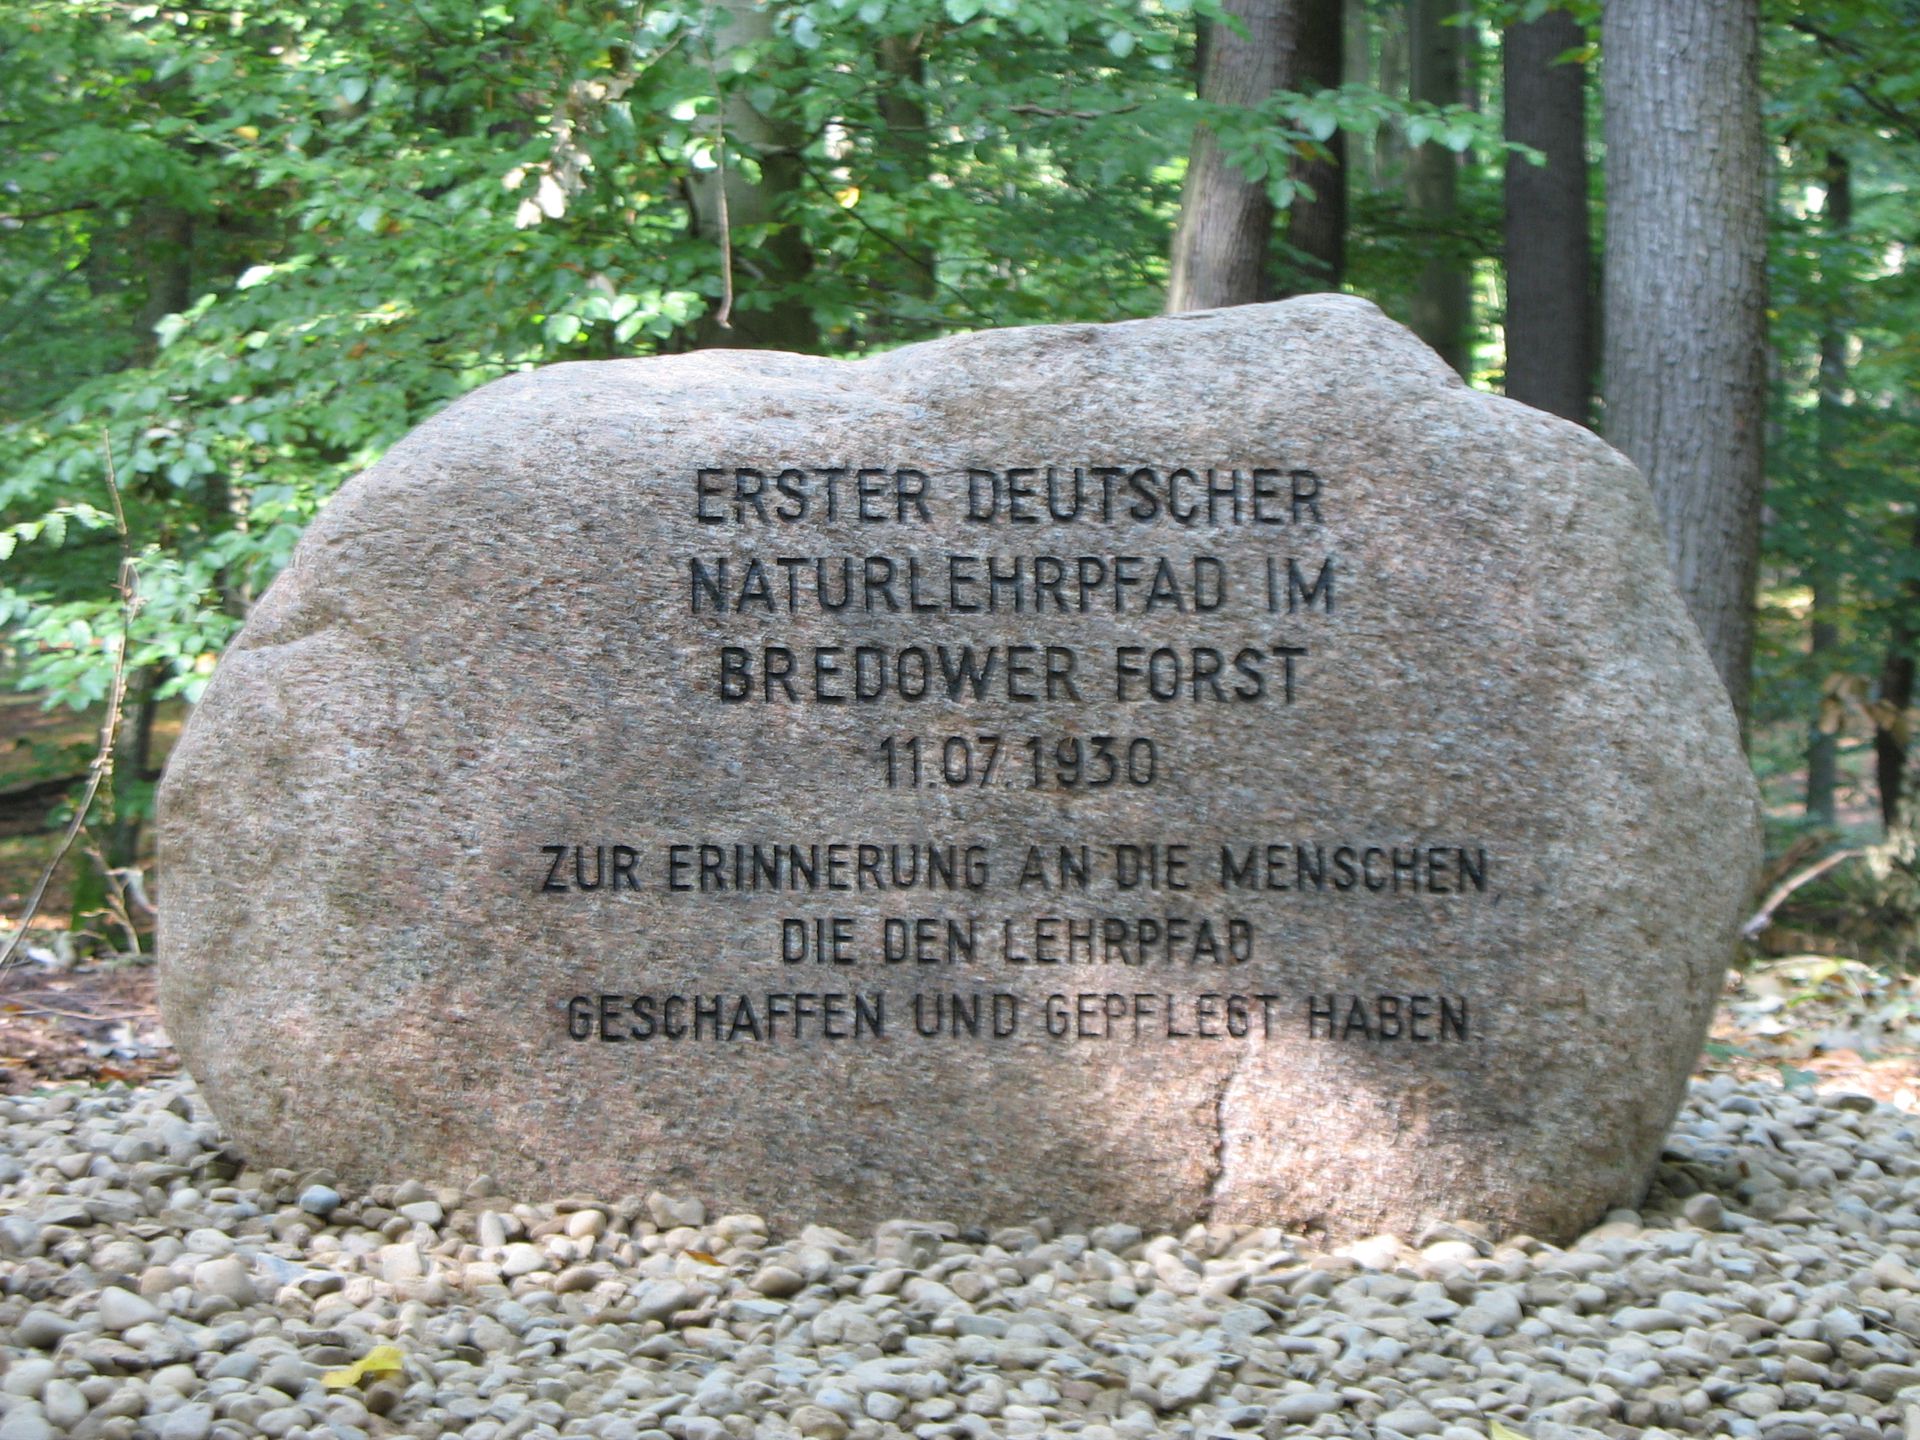 Memorial stone for the nature trail